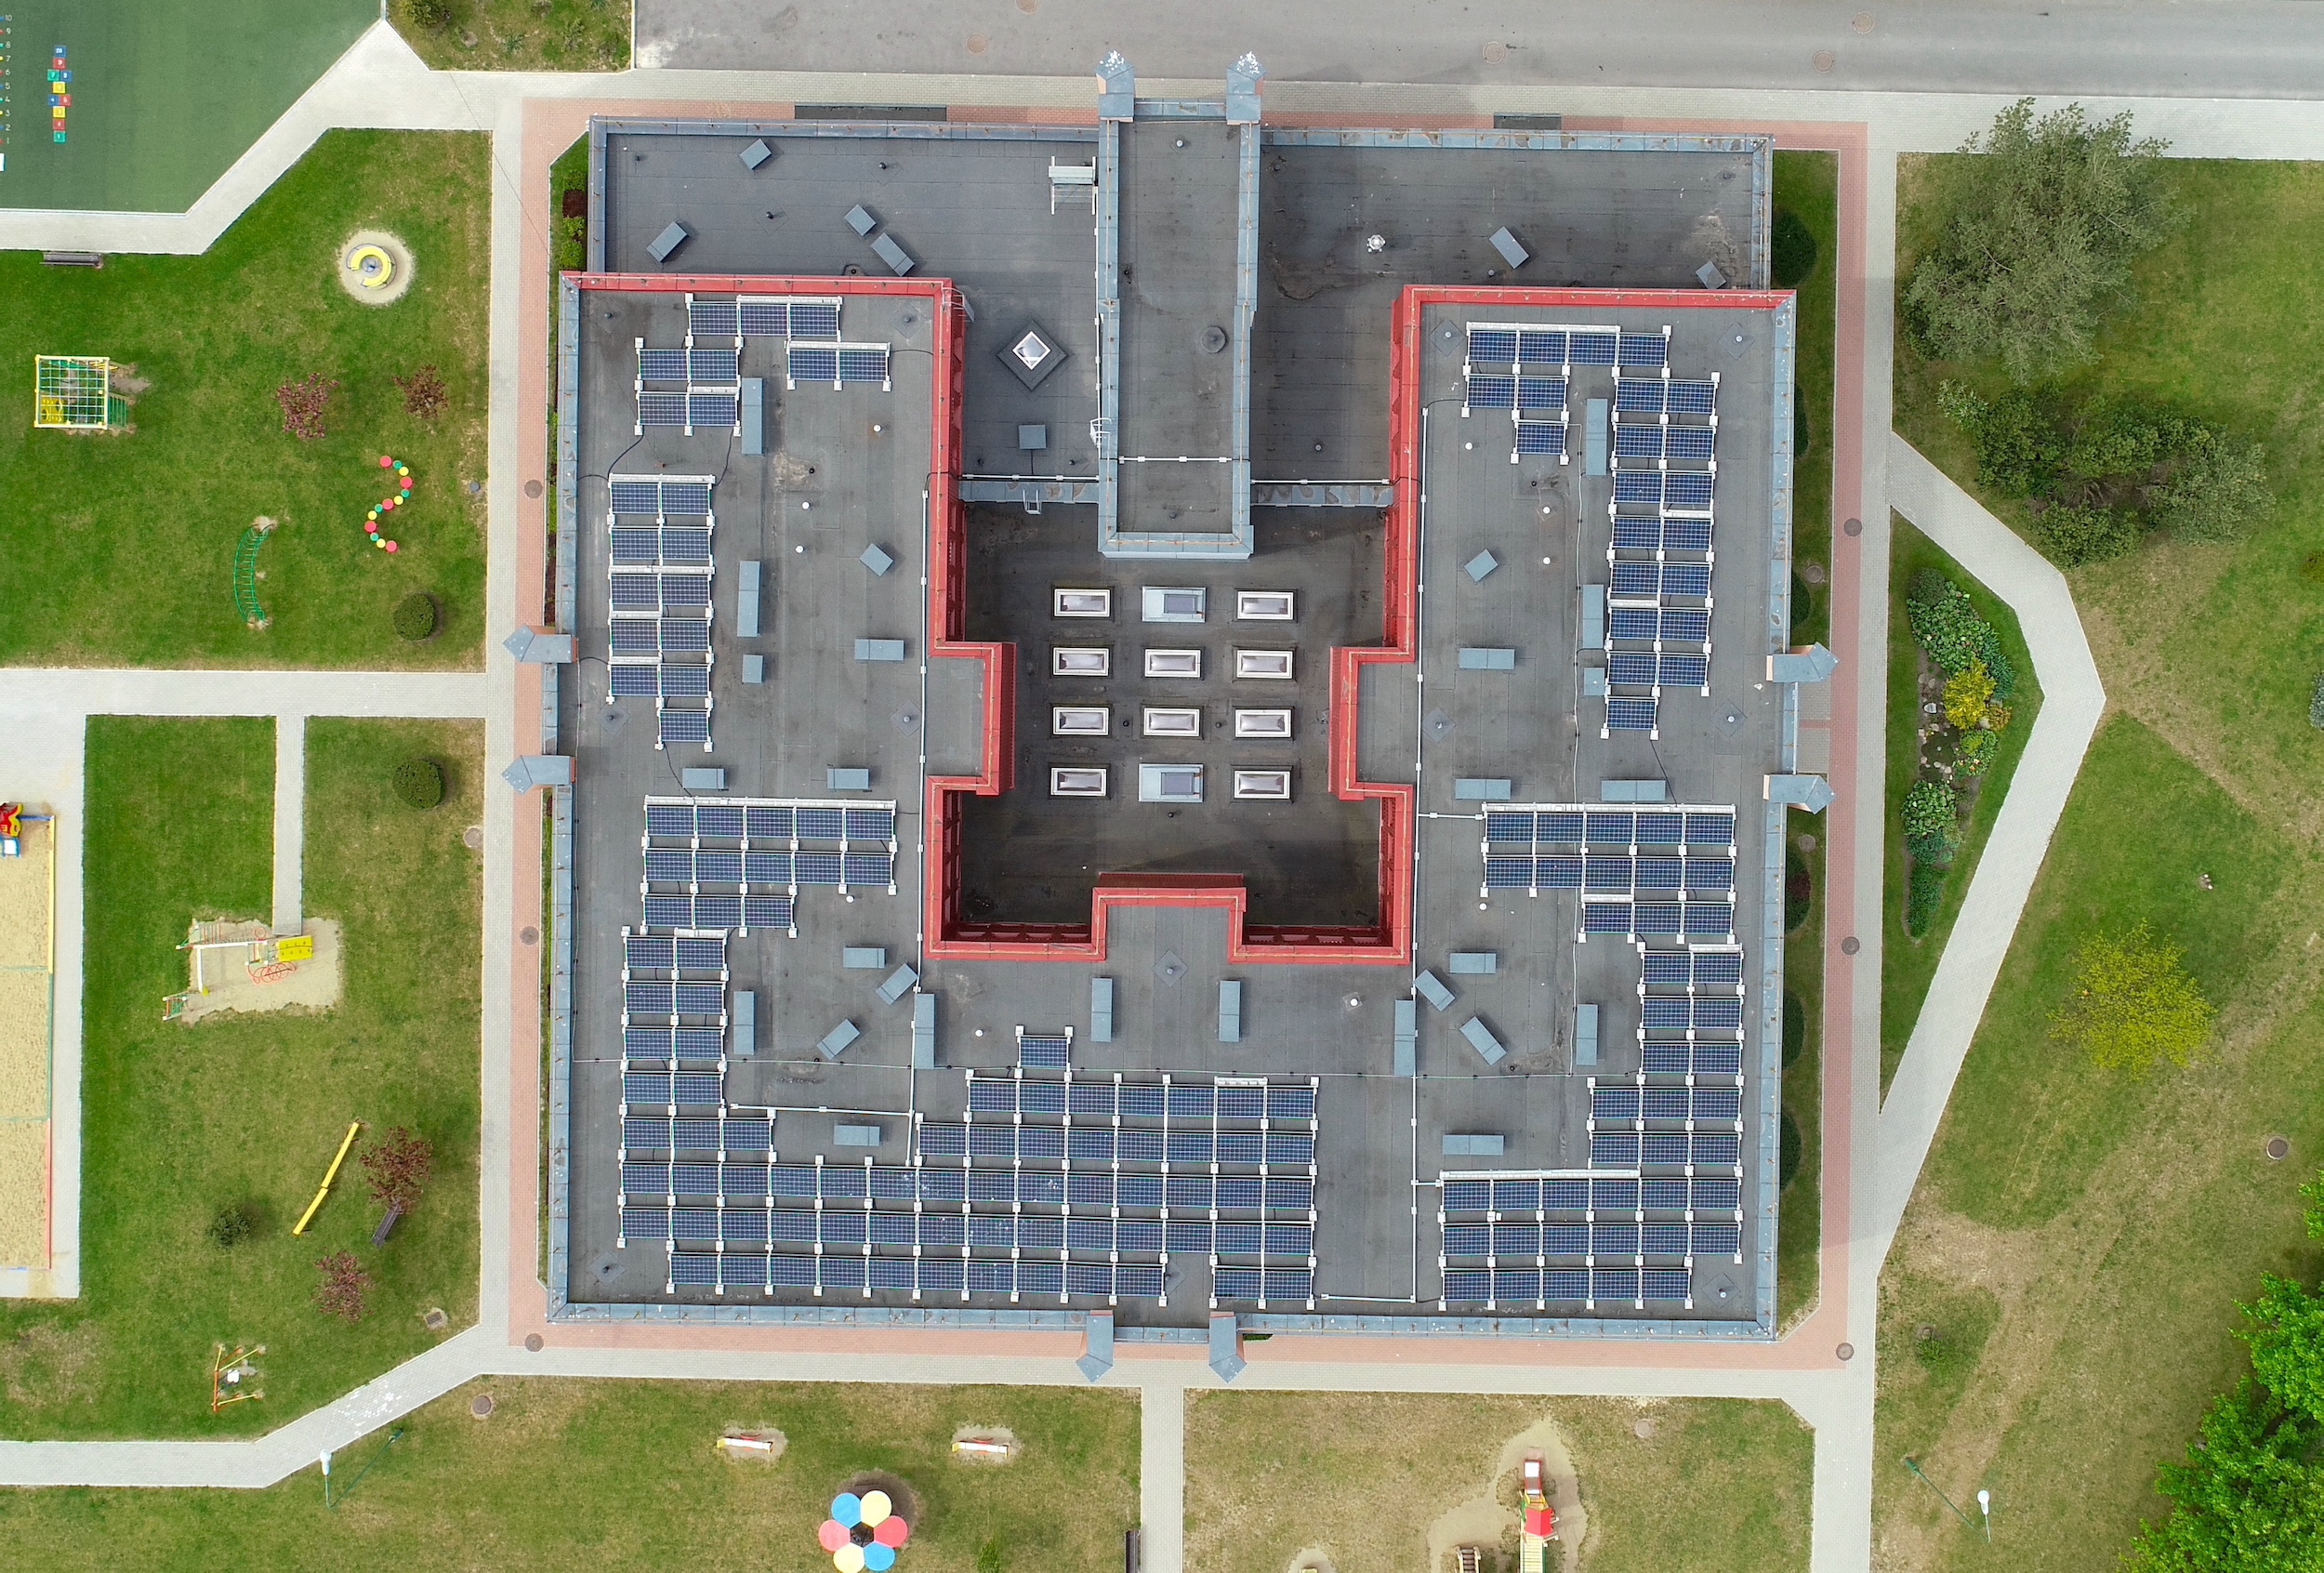 solar modules are mounted on the roof of the nursery